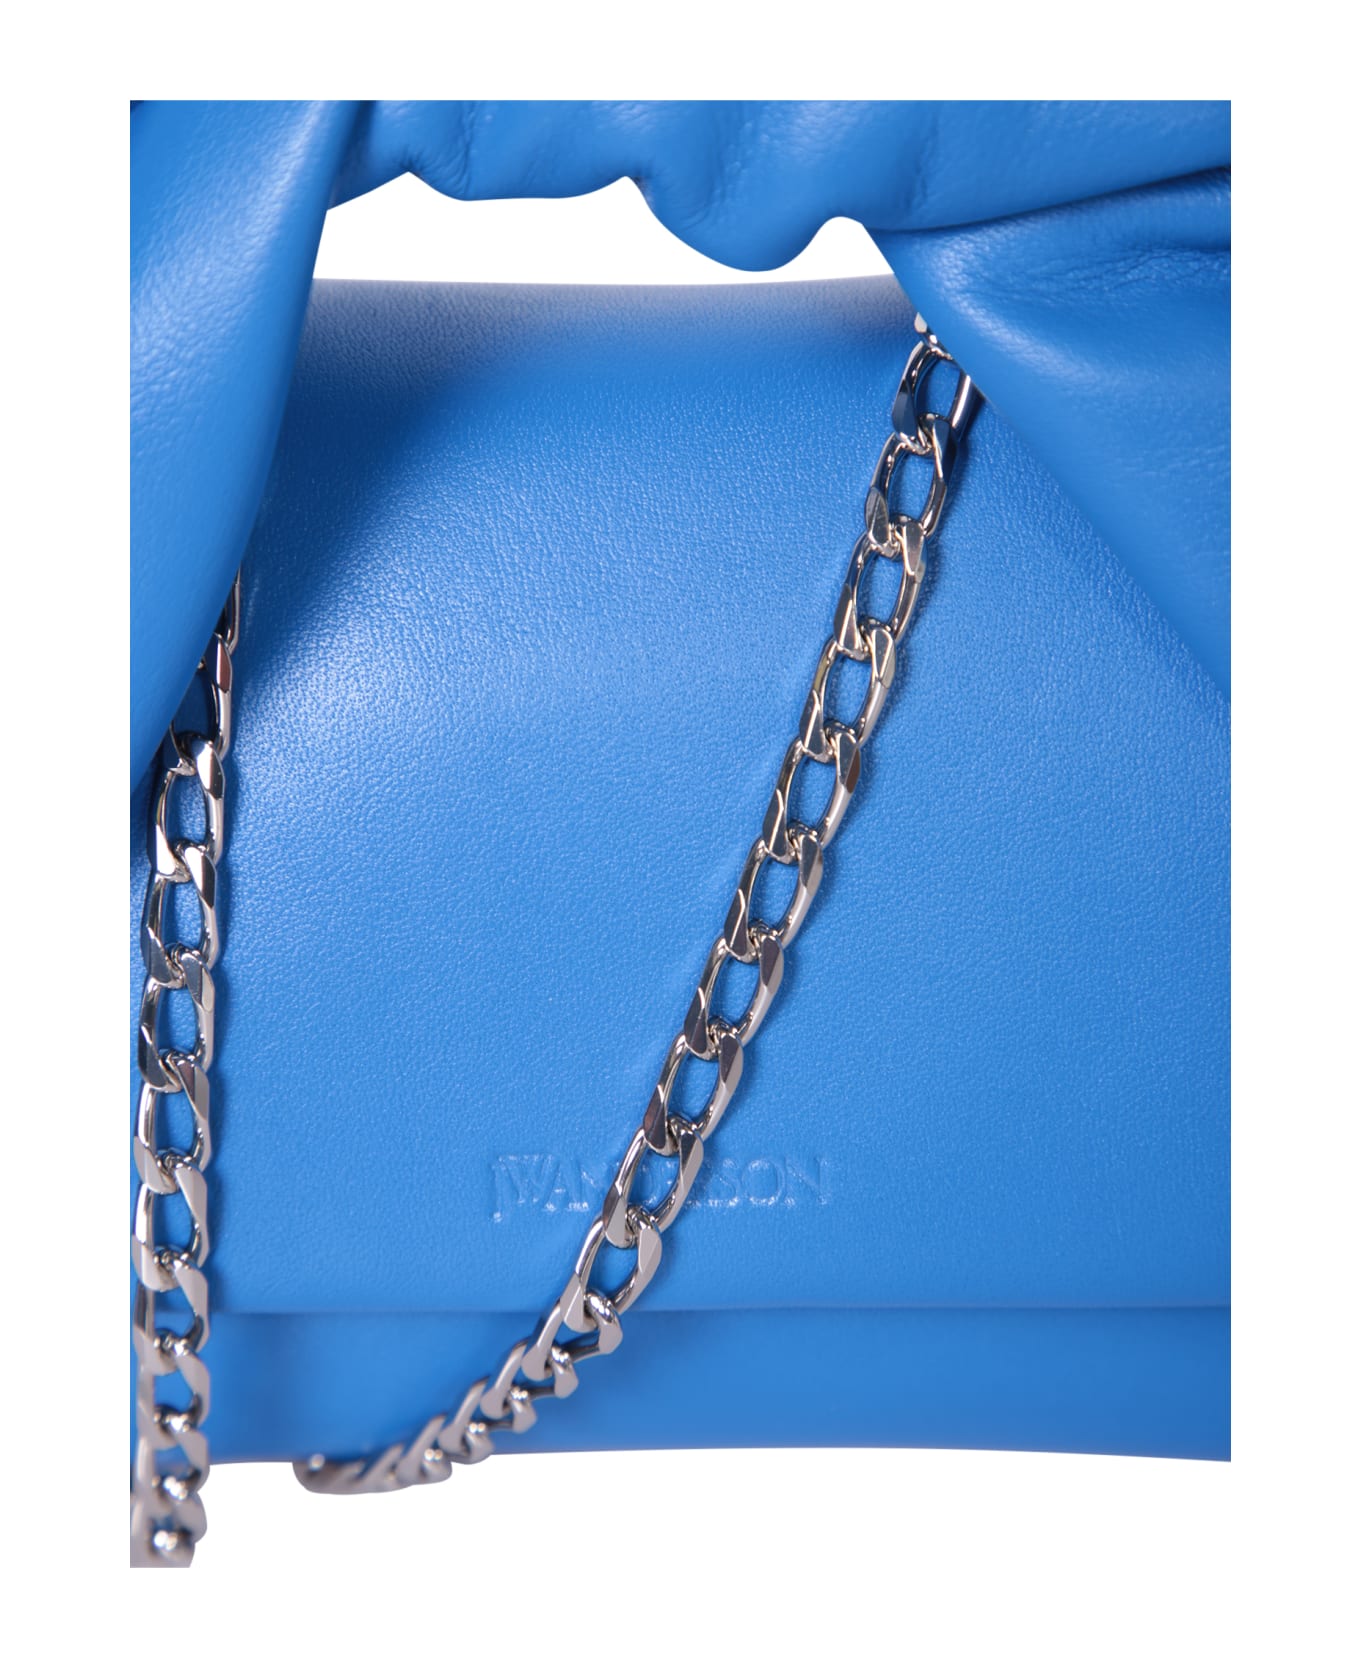 J.W. Anderson Blue Leather Bag - Blue トートバッグ